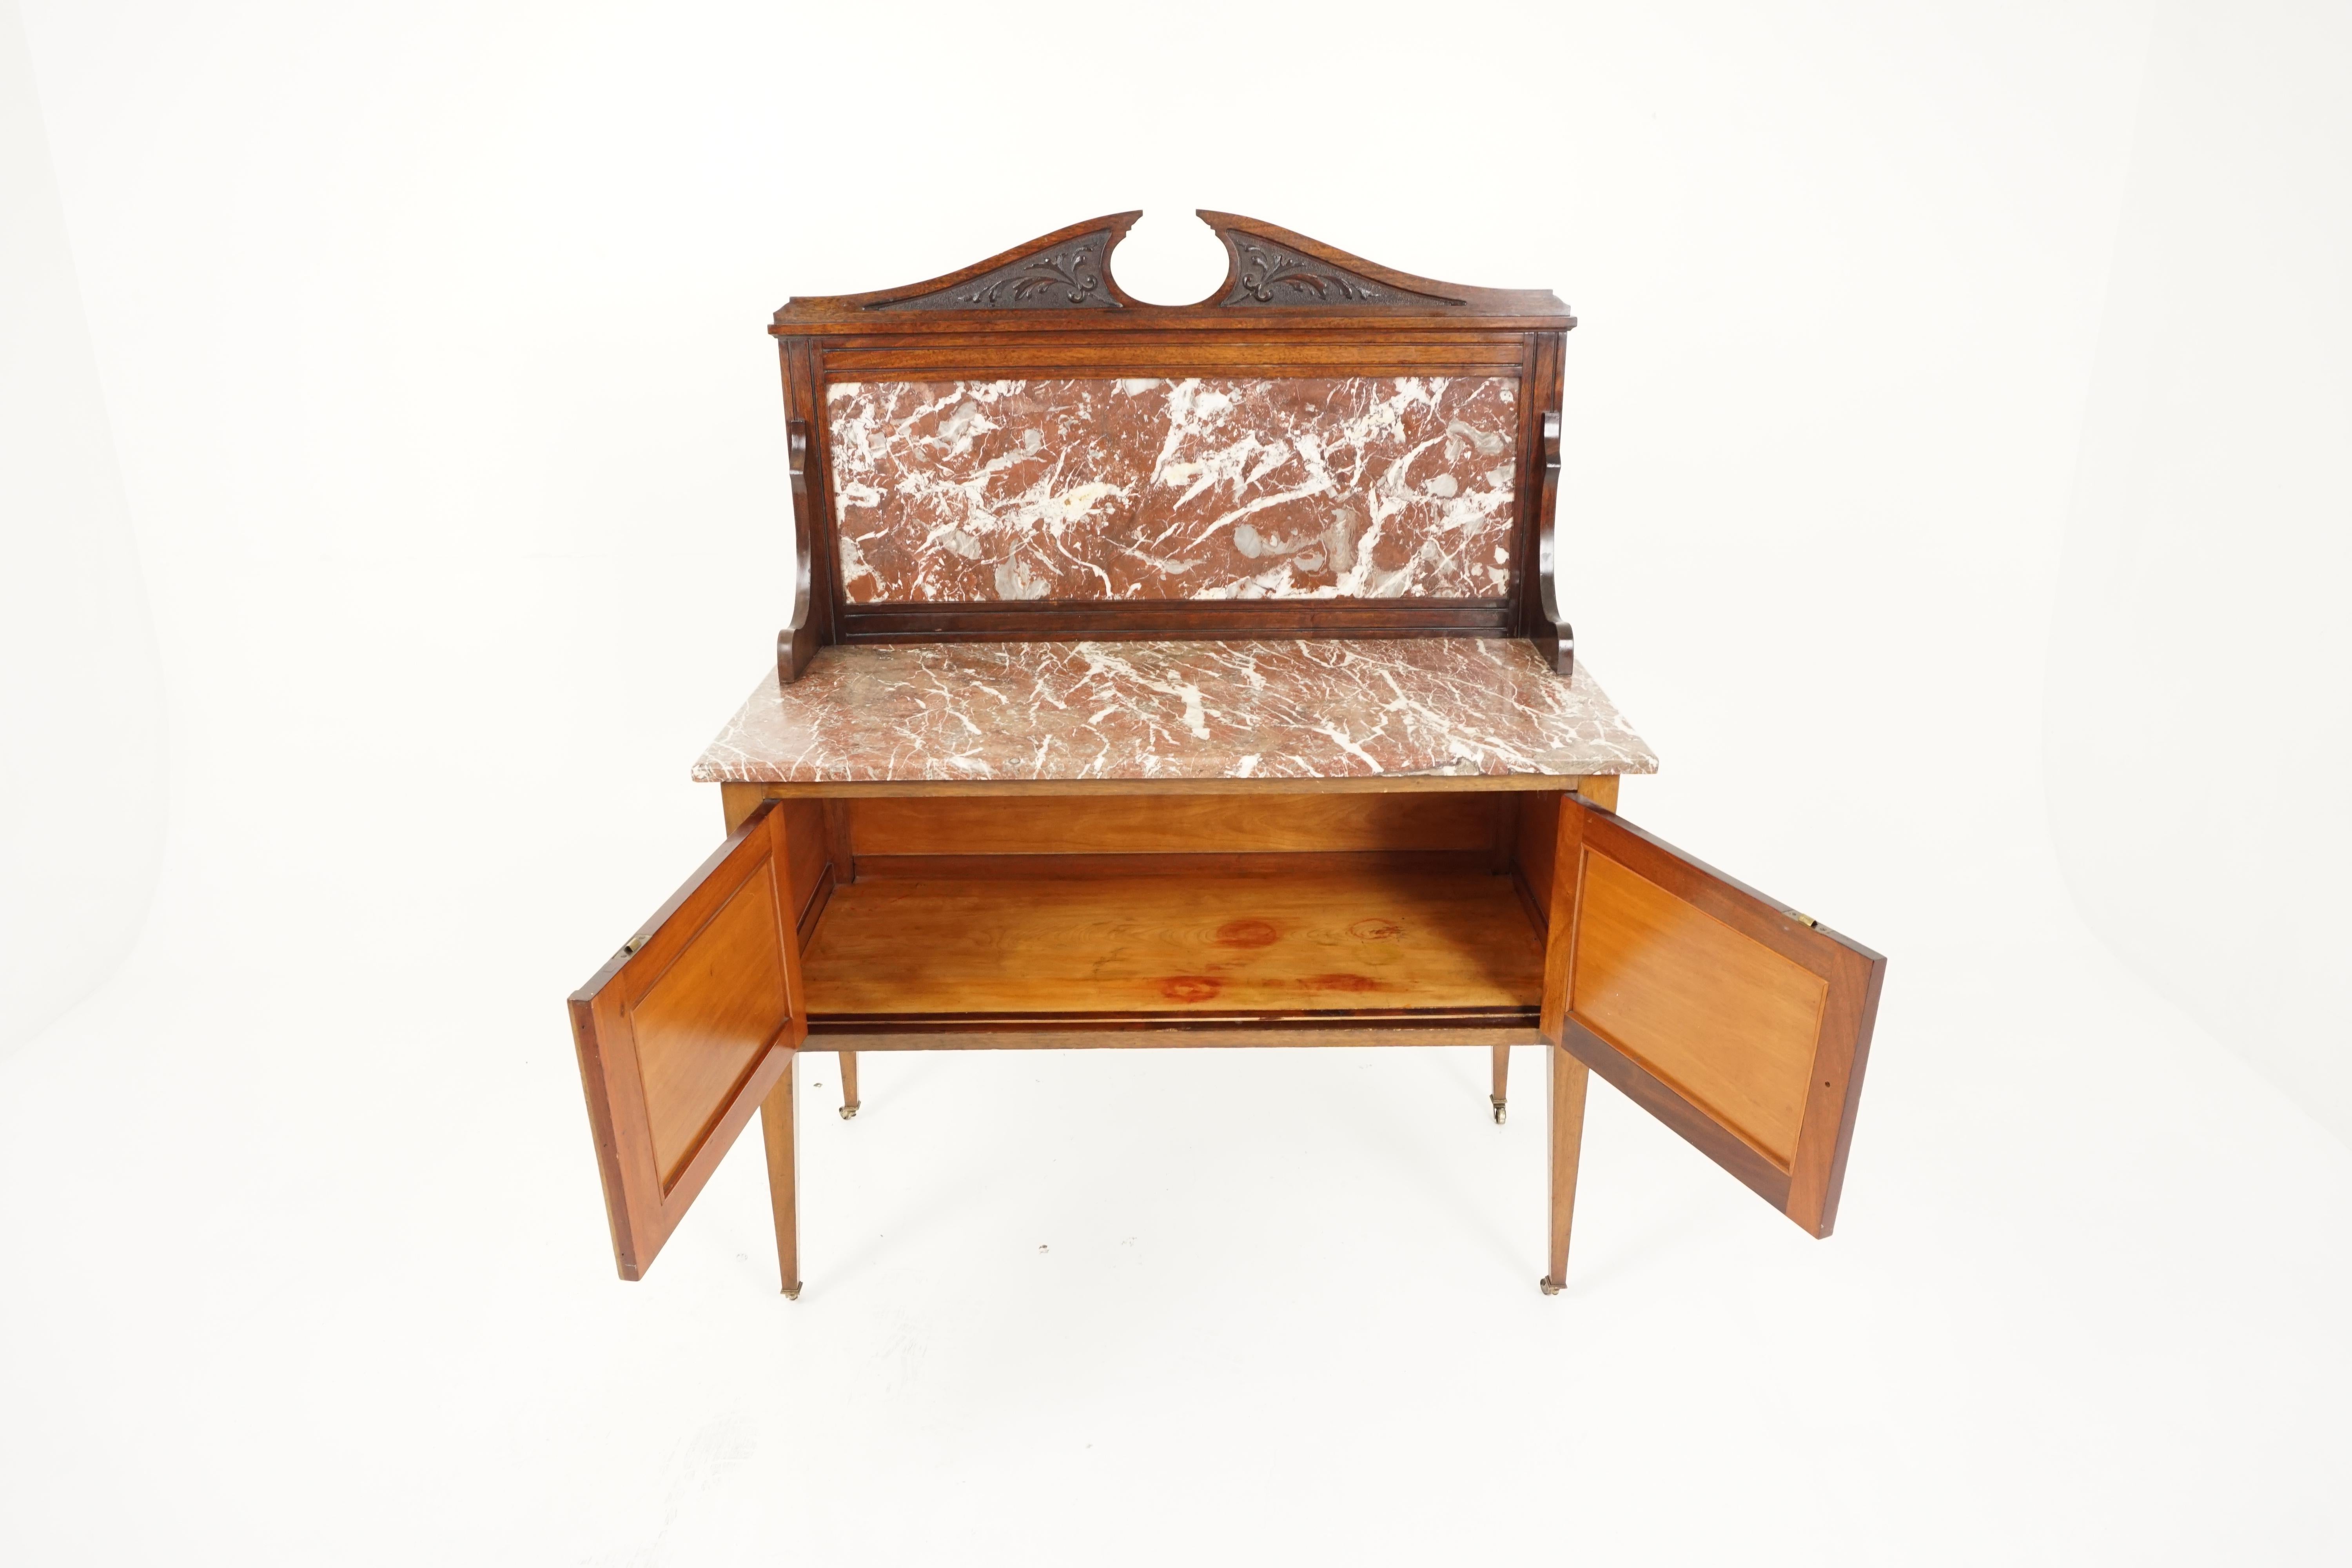 Antique Edwardian washstand, inlaid walnut, marble top, Scotland 1910, B2706

Scotland 1910
Solid walnut and inlay
Original finish
Carved pediment to the top marble top back splash
Pair of inlaid walnut doors open to reveal large storage